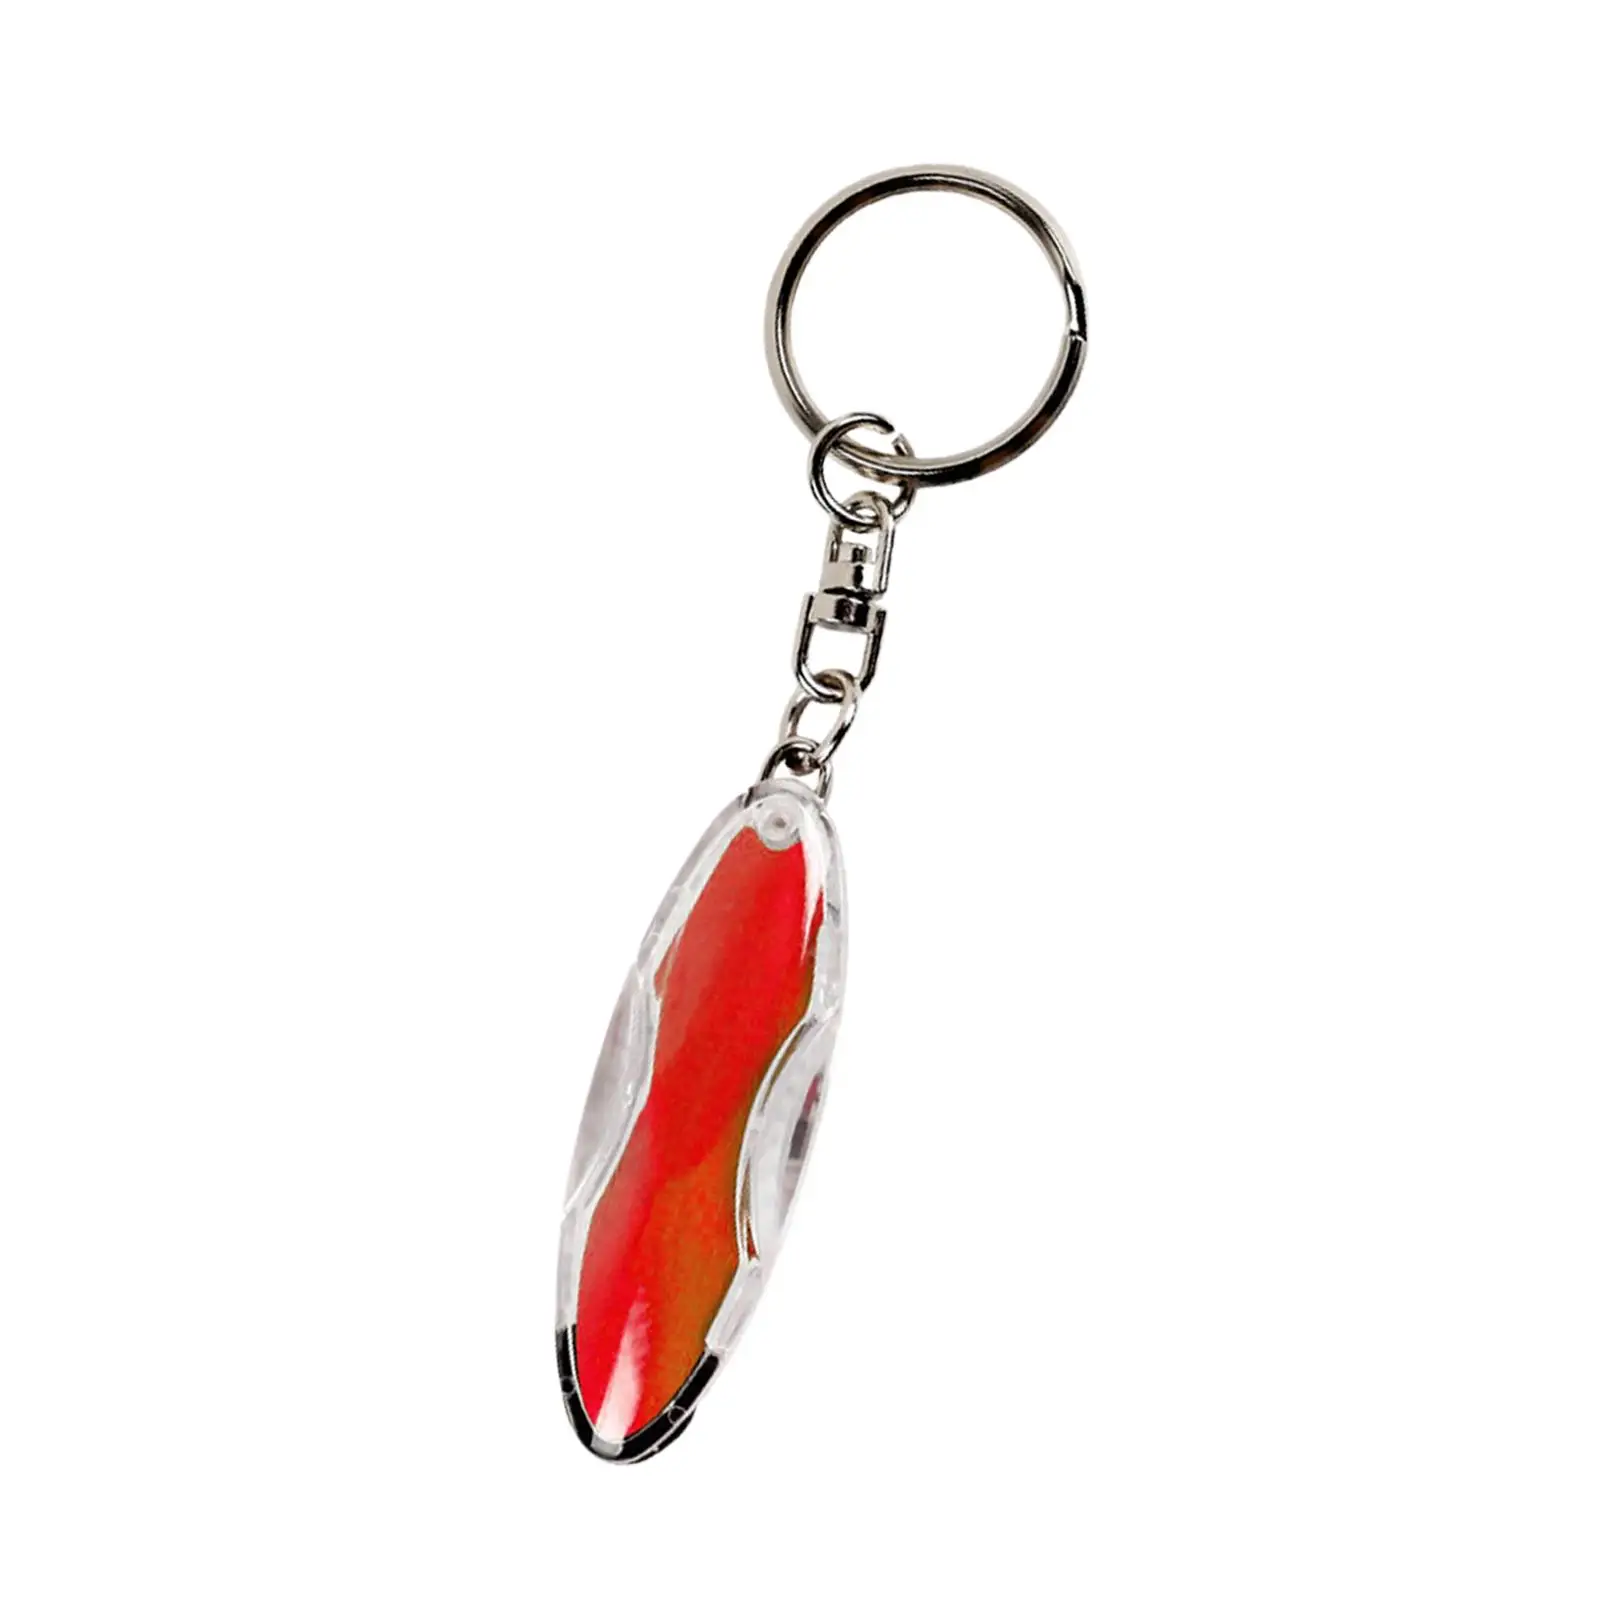 Portable Key Chain, Keyring Car Interior Accessories Gifts Practical Tools for